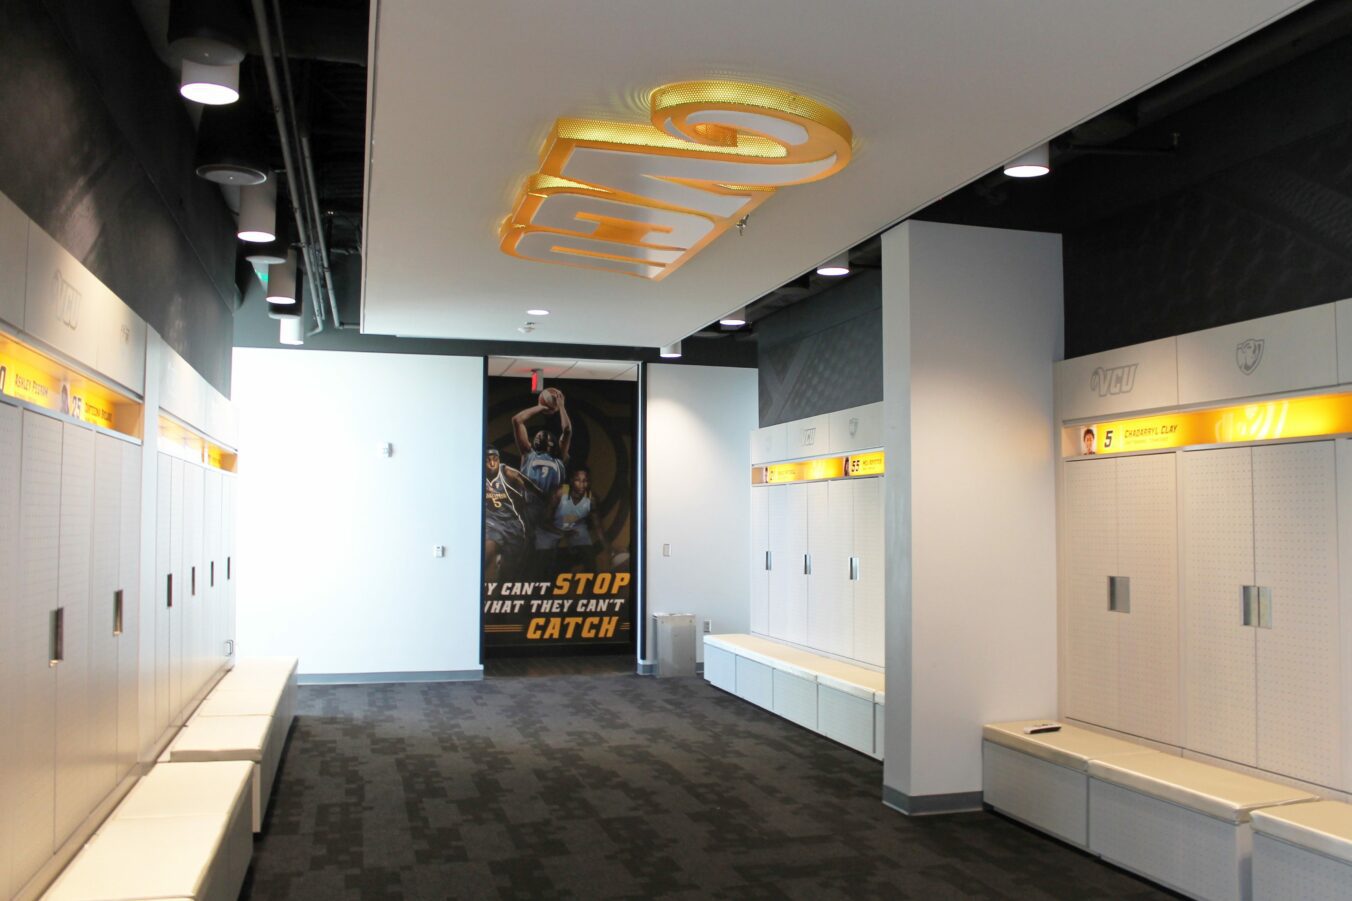 VCU Athletics Basketball Locker room with player's names above white lockers